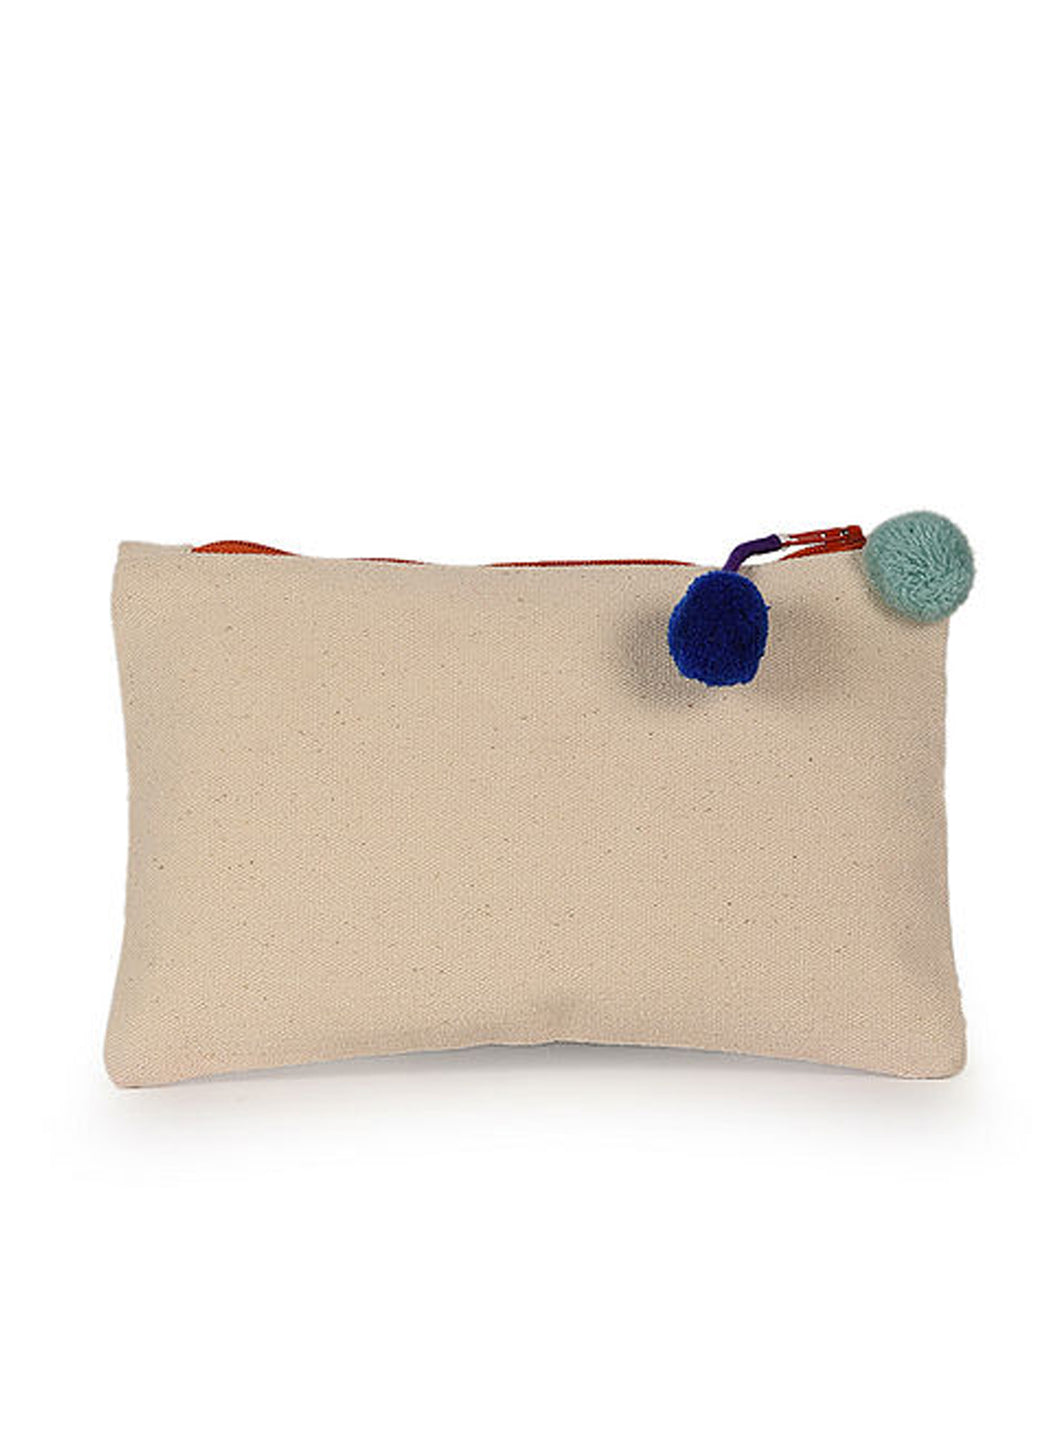 Kanyoga Cotton Canvas Pouch With Contrast Orange Zip & Dual Bright Disty Pom-Pom For Women